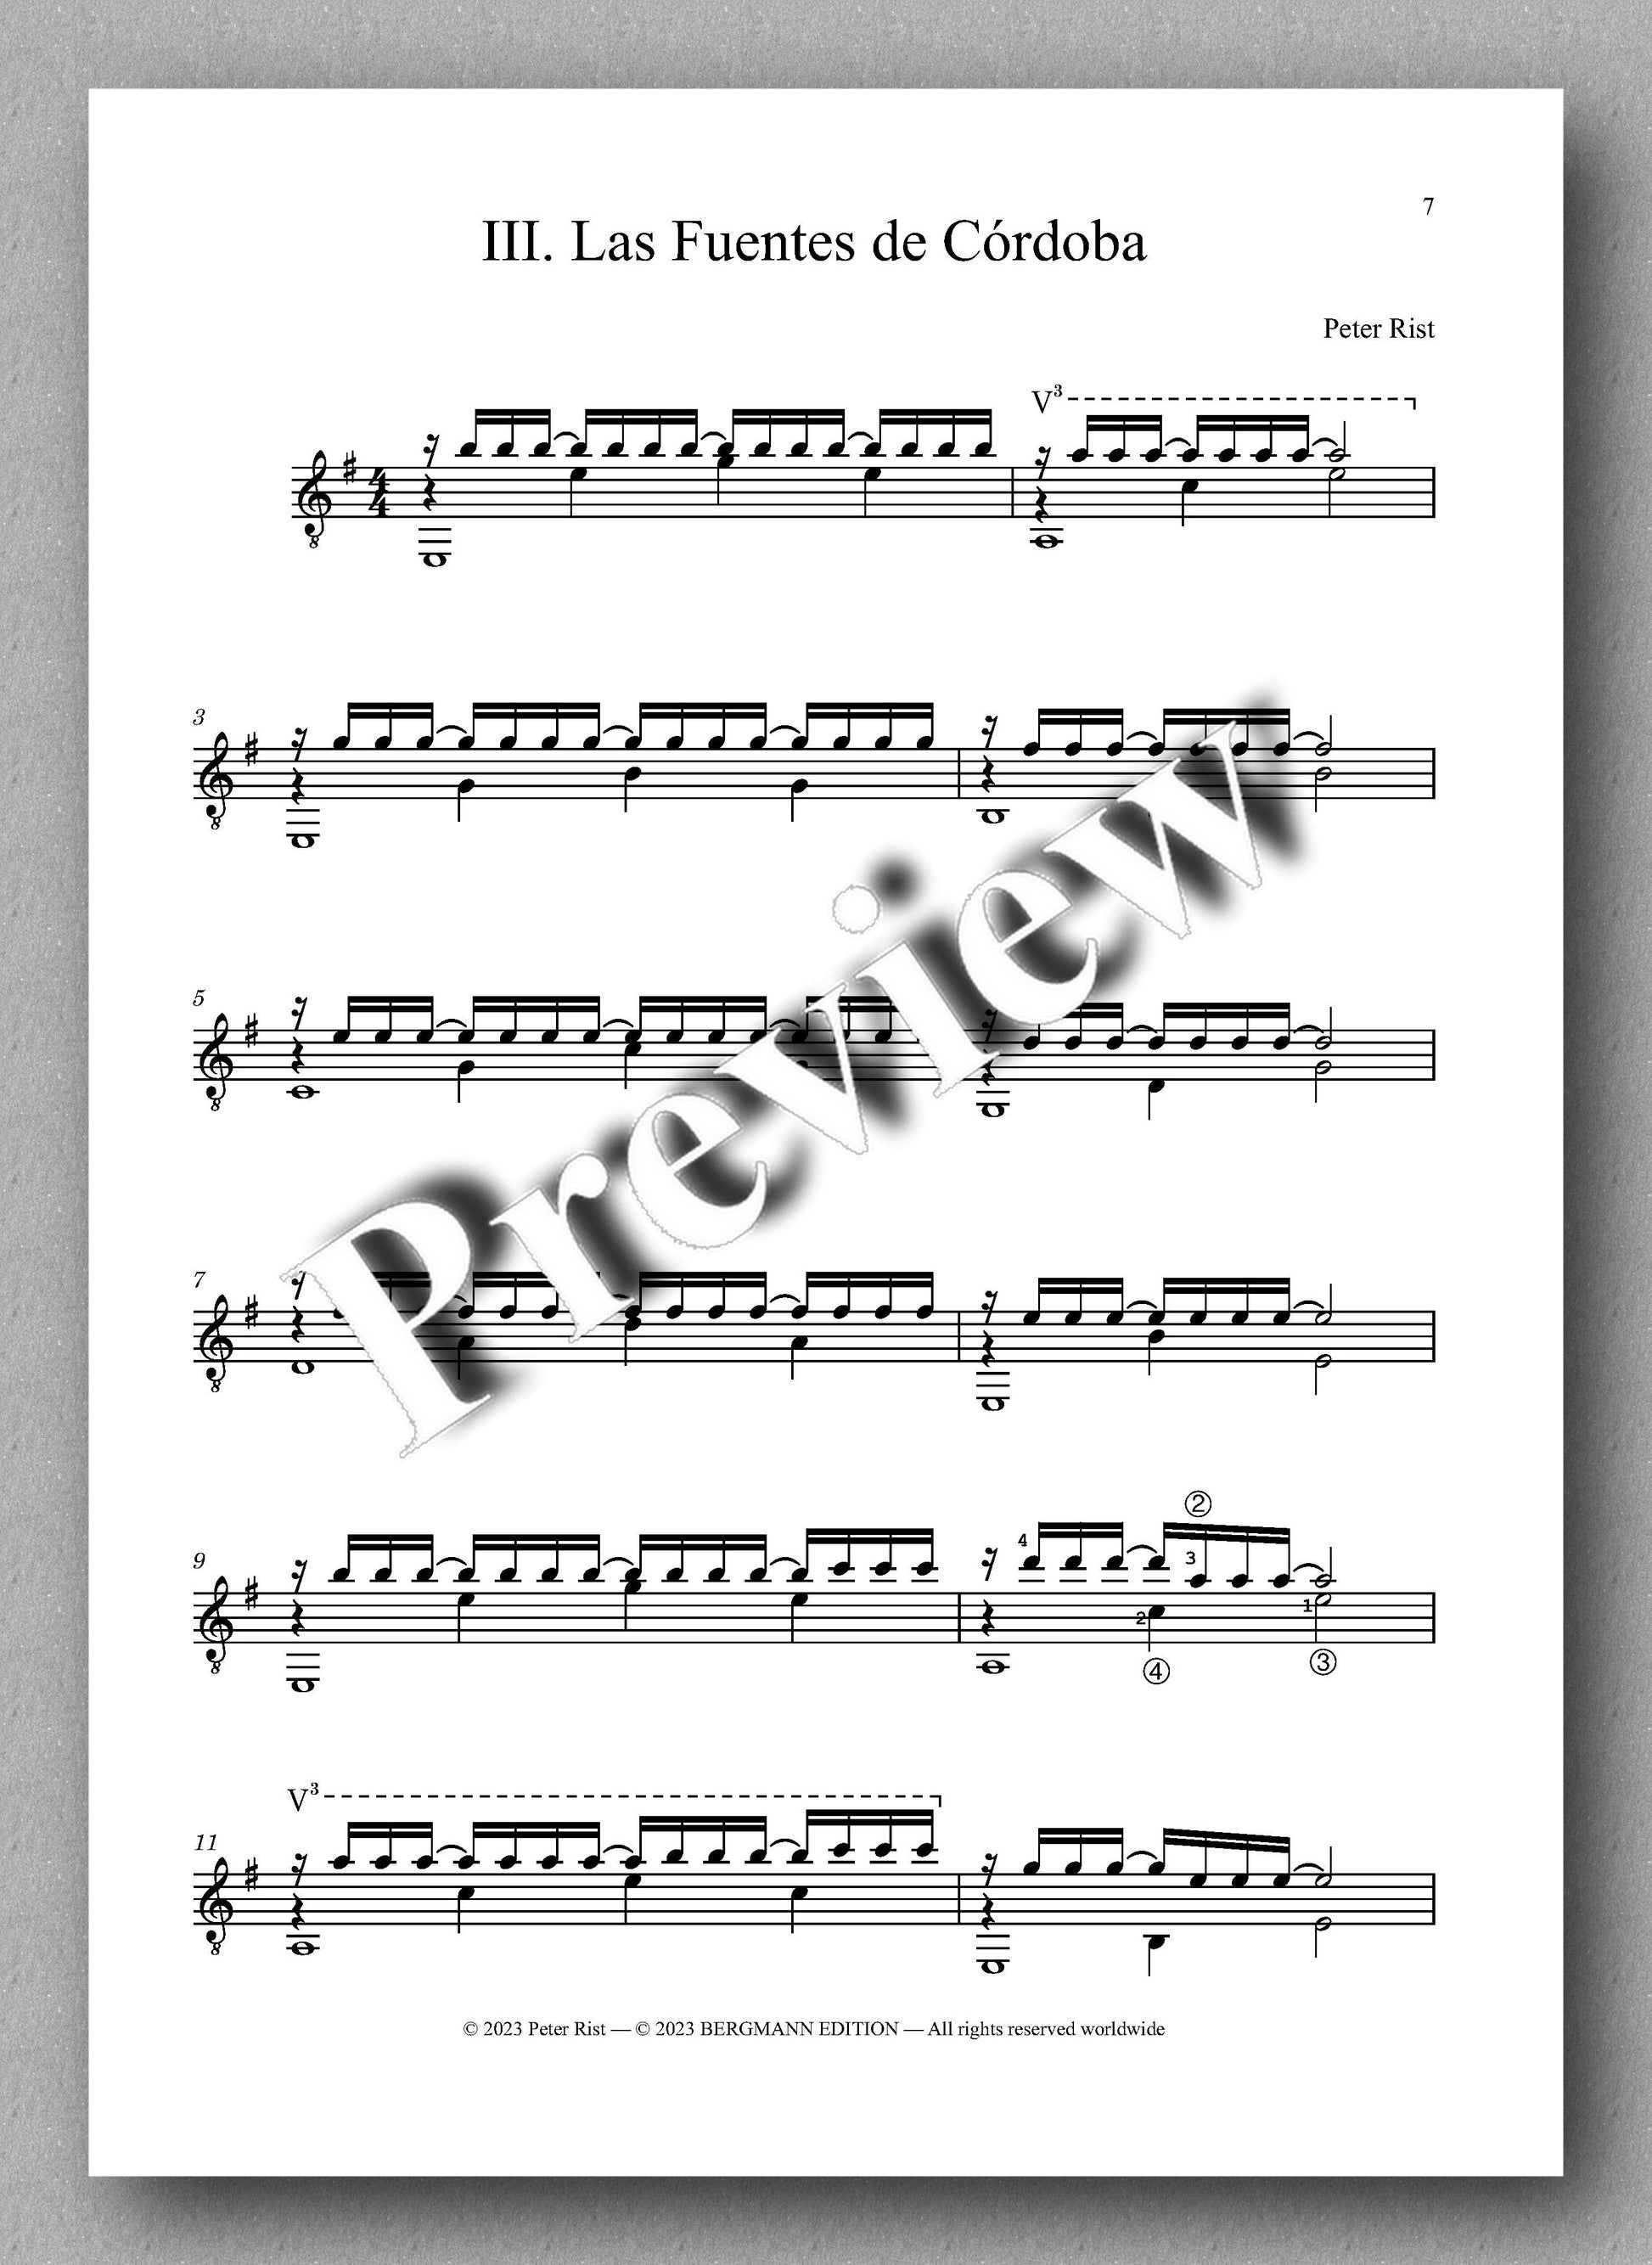 Córdoba by Peter Rist - preview of the music score 2